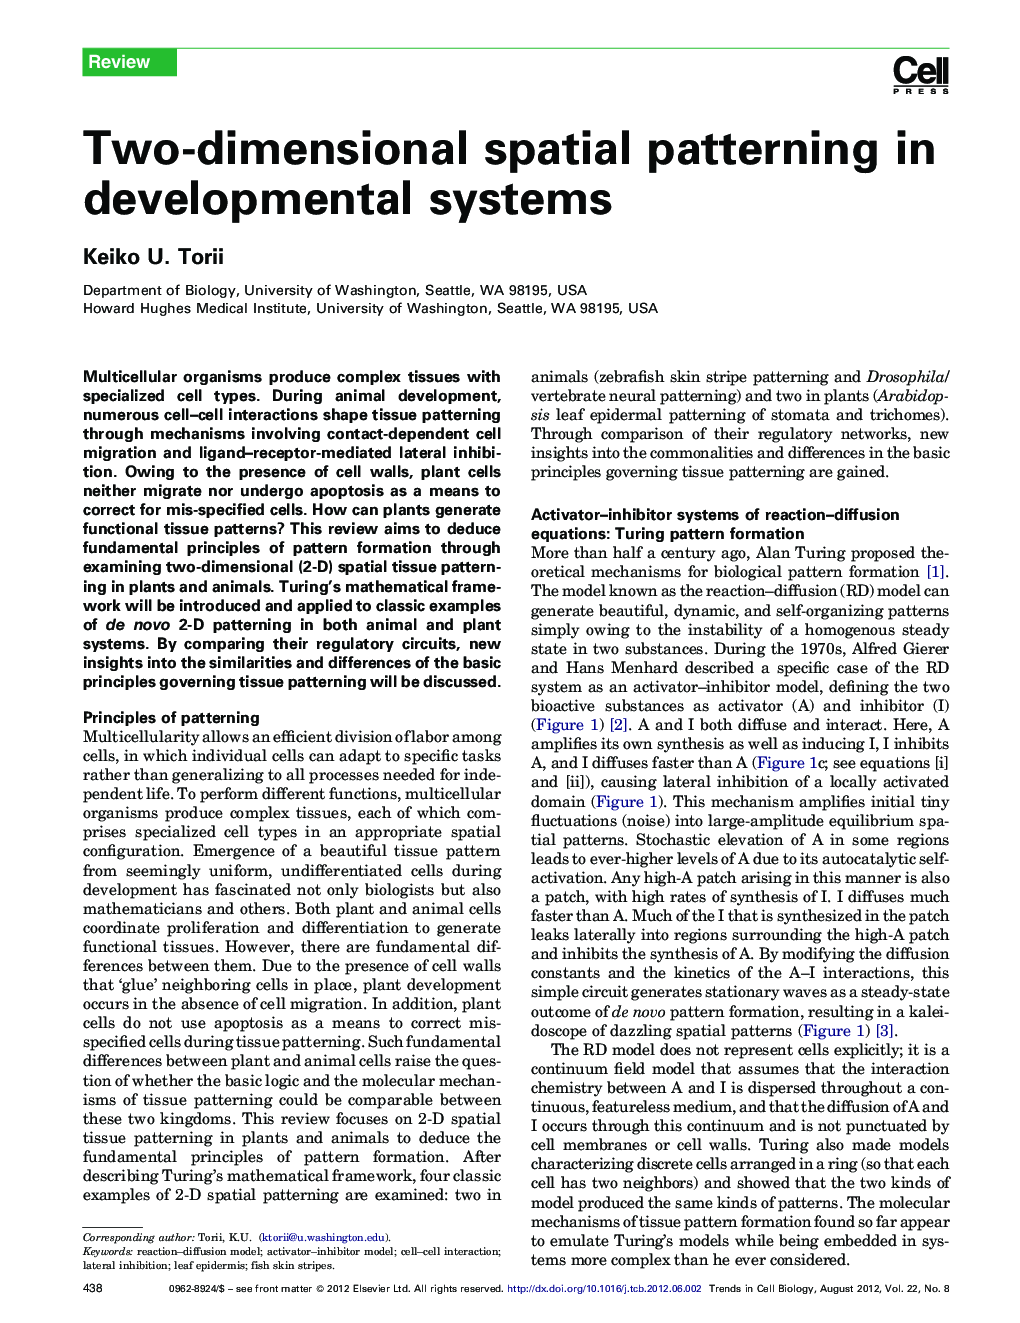 Two-dimensional spatial patterning in developmental systems